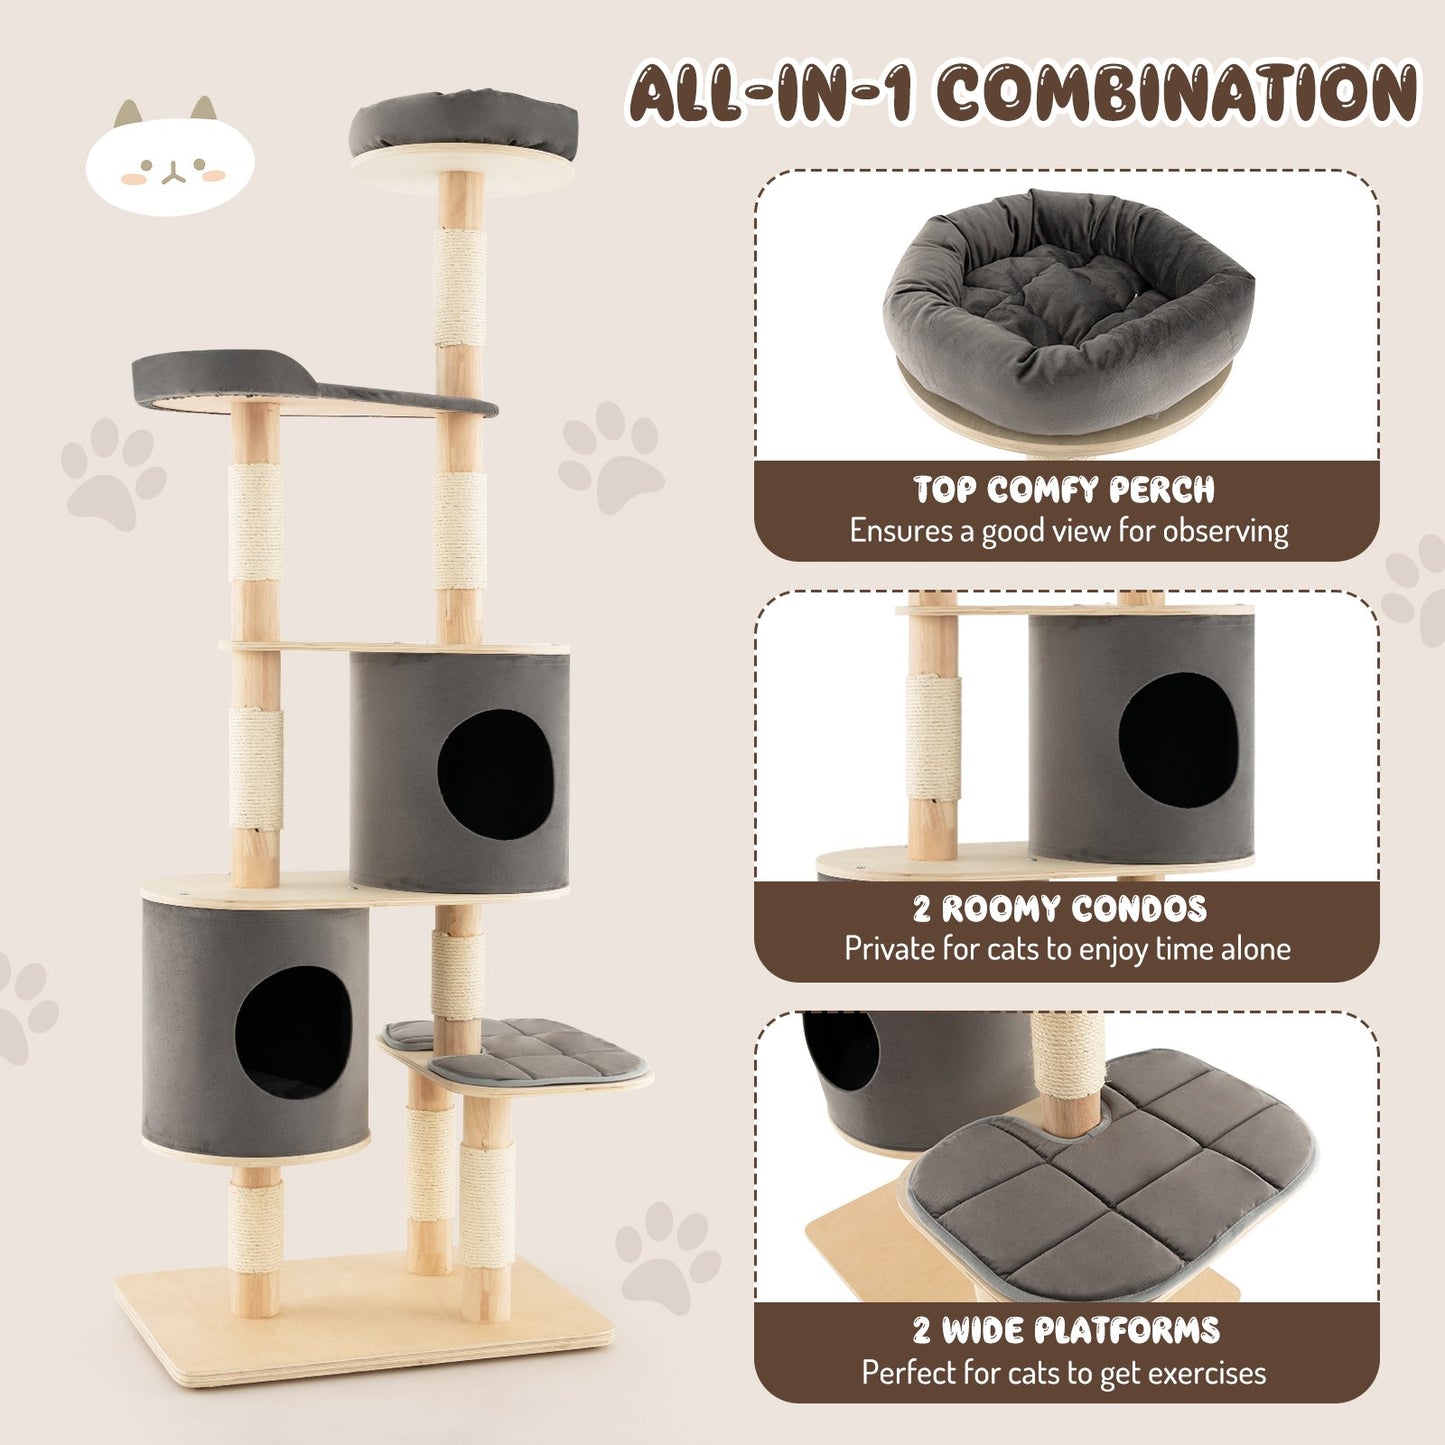 6-Tier Wooden Cat Tree with 2 Removeable Condos Platforms and Perch, Gray